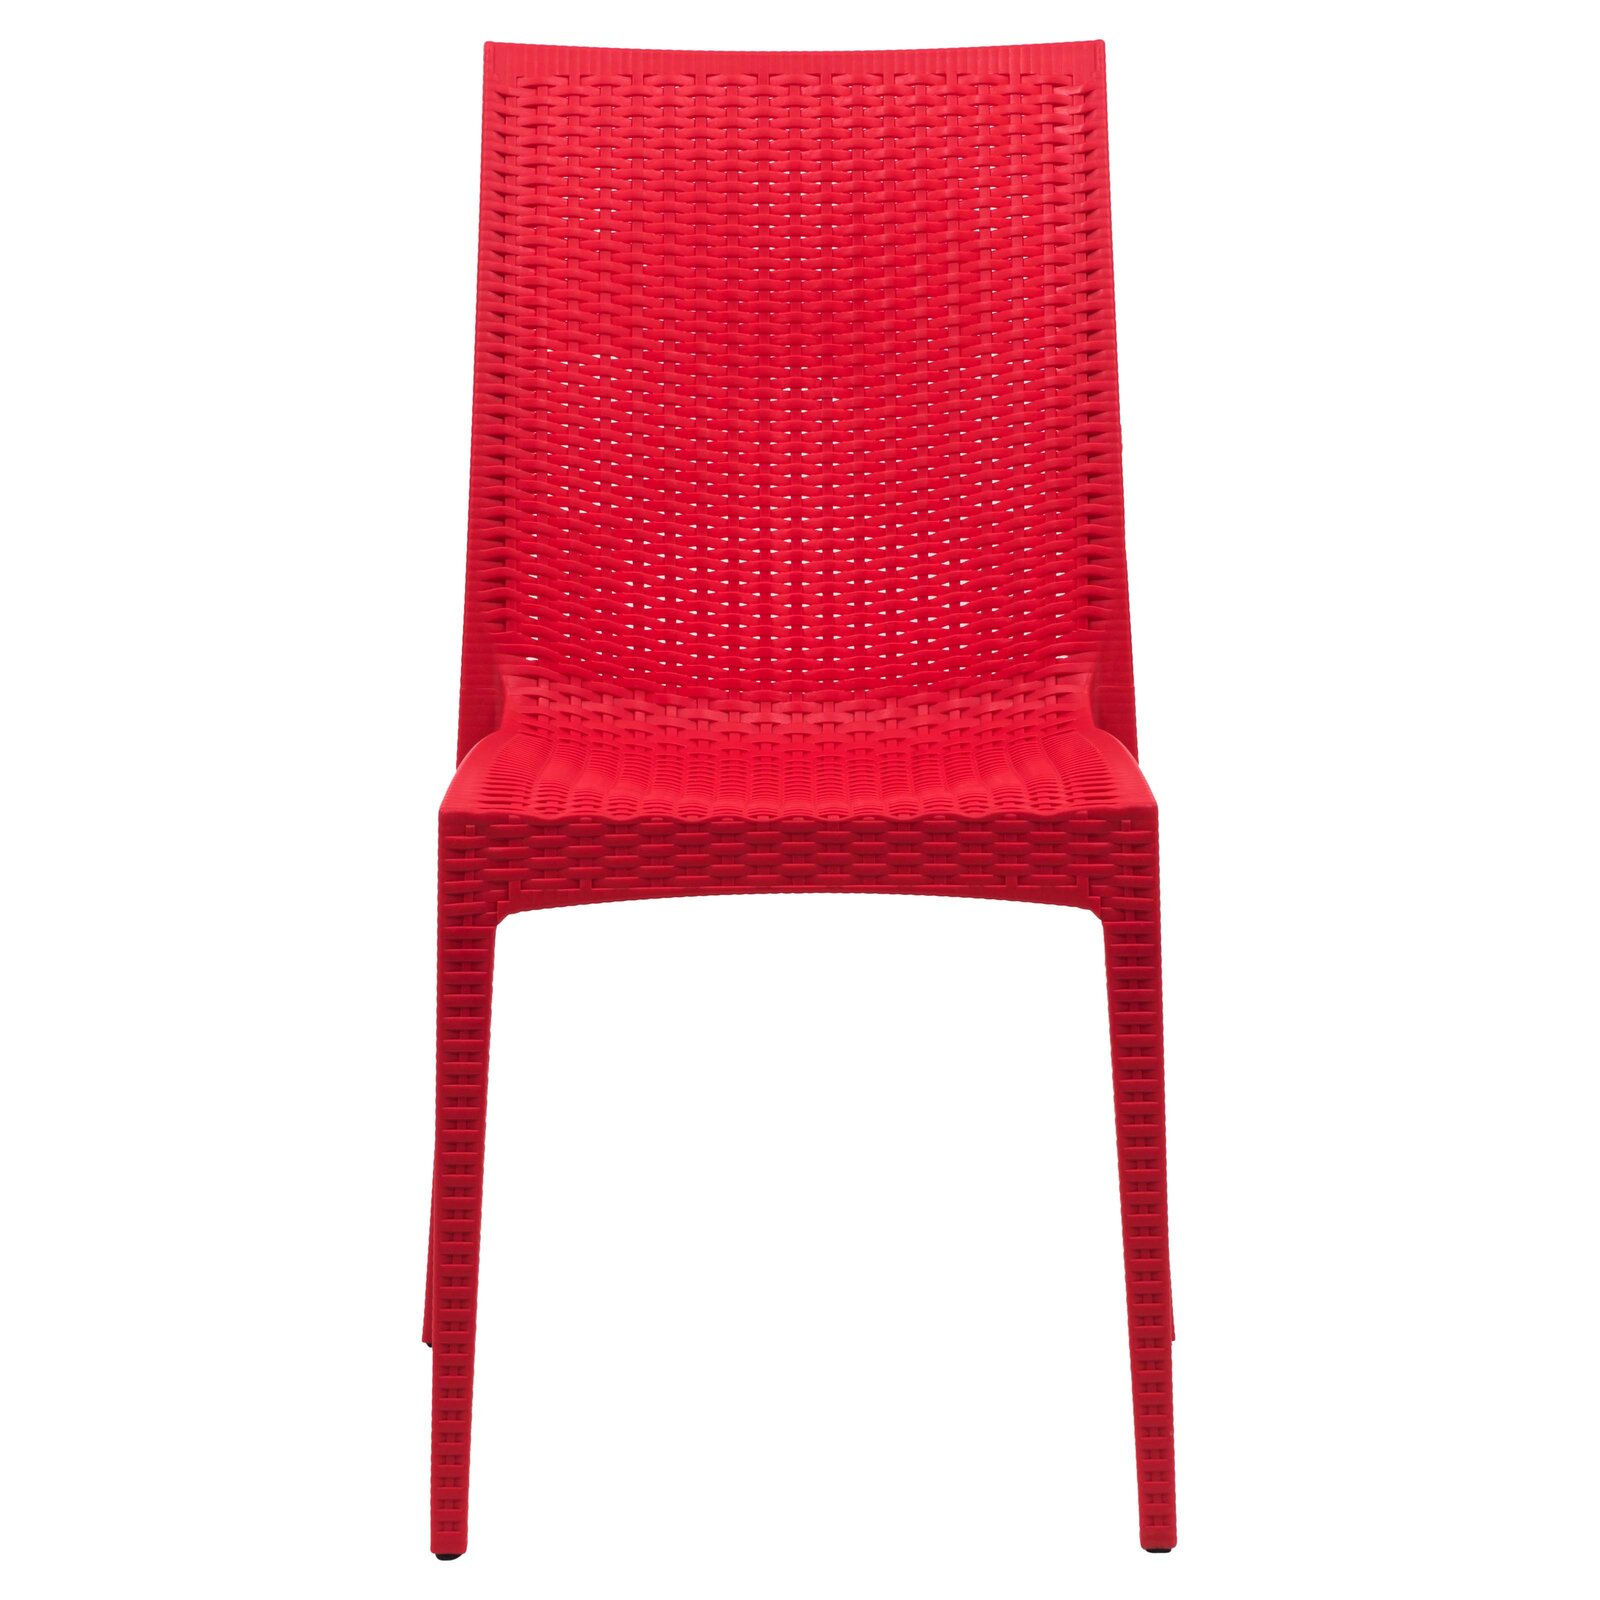 Quade Stacking Patio Dining Chair, Assembled, Suitable for indoor and outdoor use - image 1 of 6